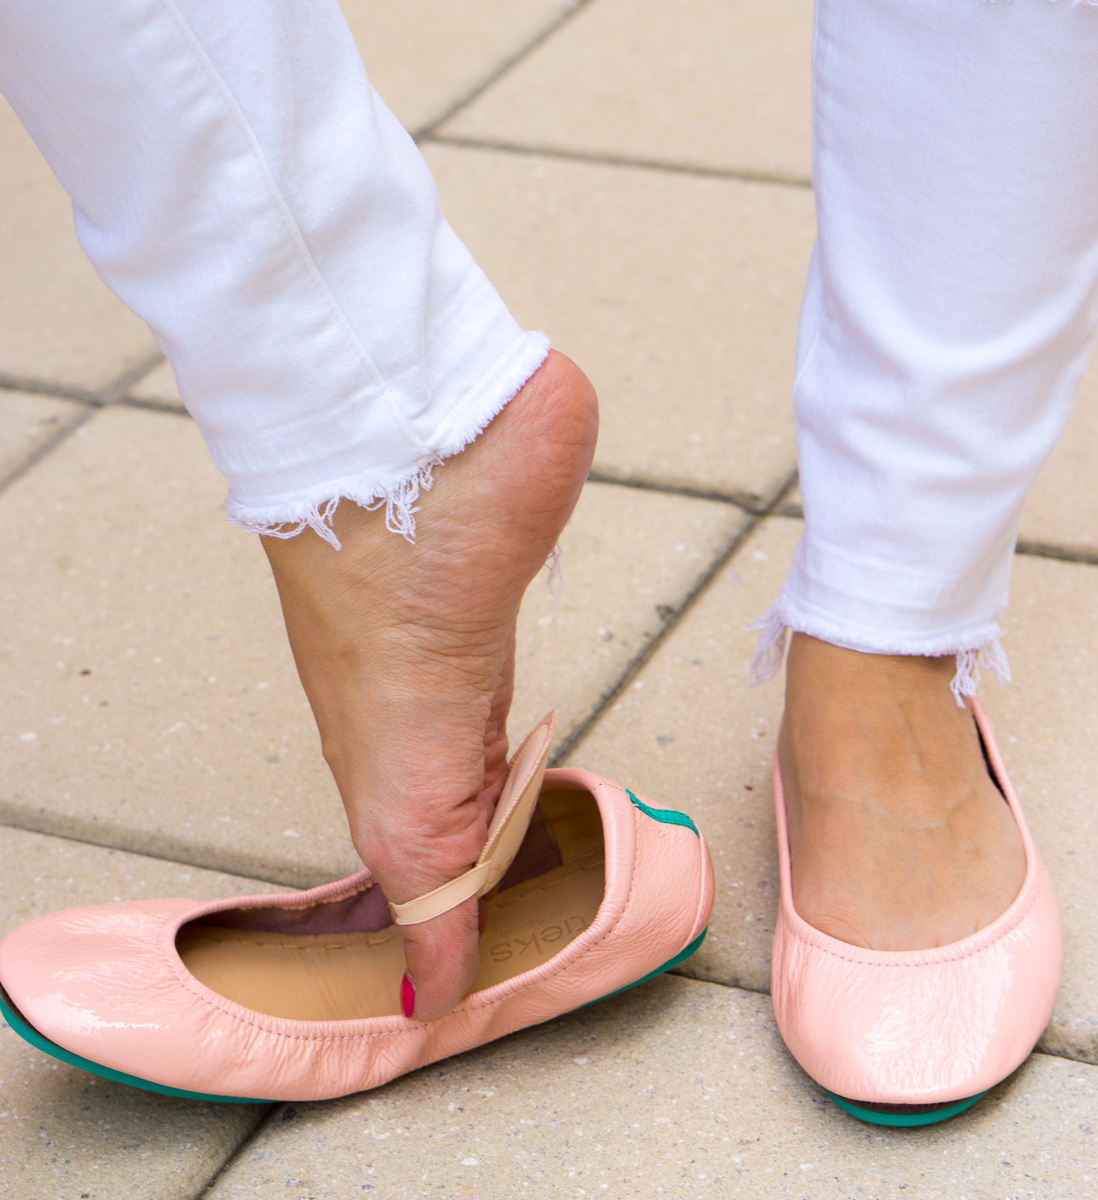 Tieks Cotton Candy Pink ballet flats review with Sheec Socks SockShion cushion perfect for ballet flats and wearing flats all day in comfort. Women's ballet flats spring summer outfit travel ideas